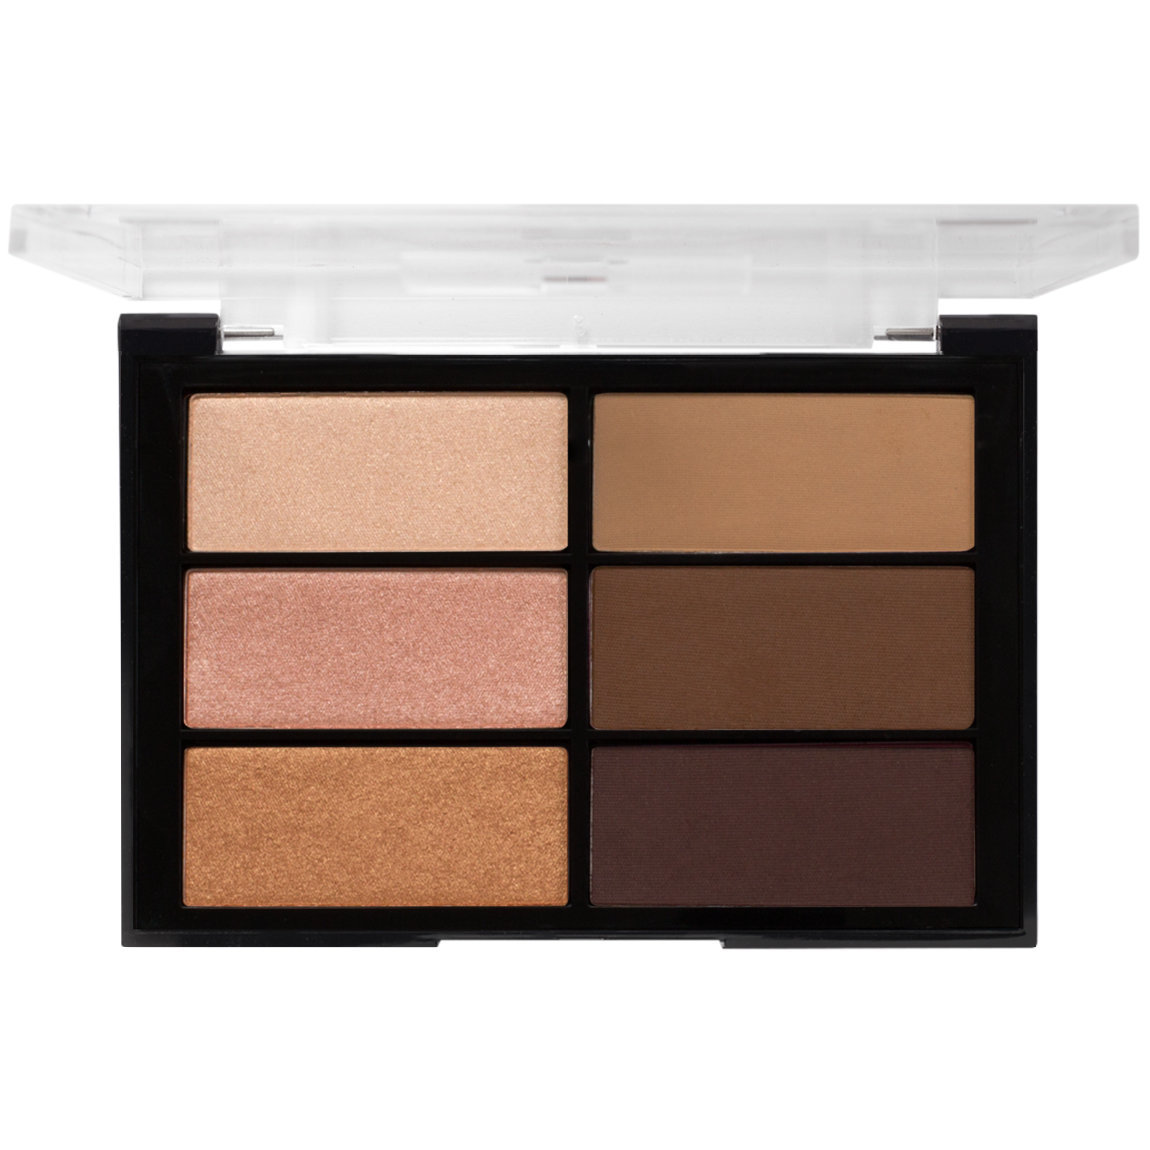 Viseart Highlight Sculpting Palette alternative view 1 - product swatch.